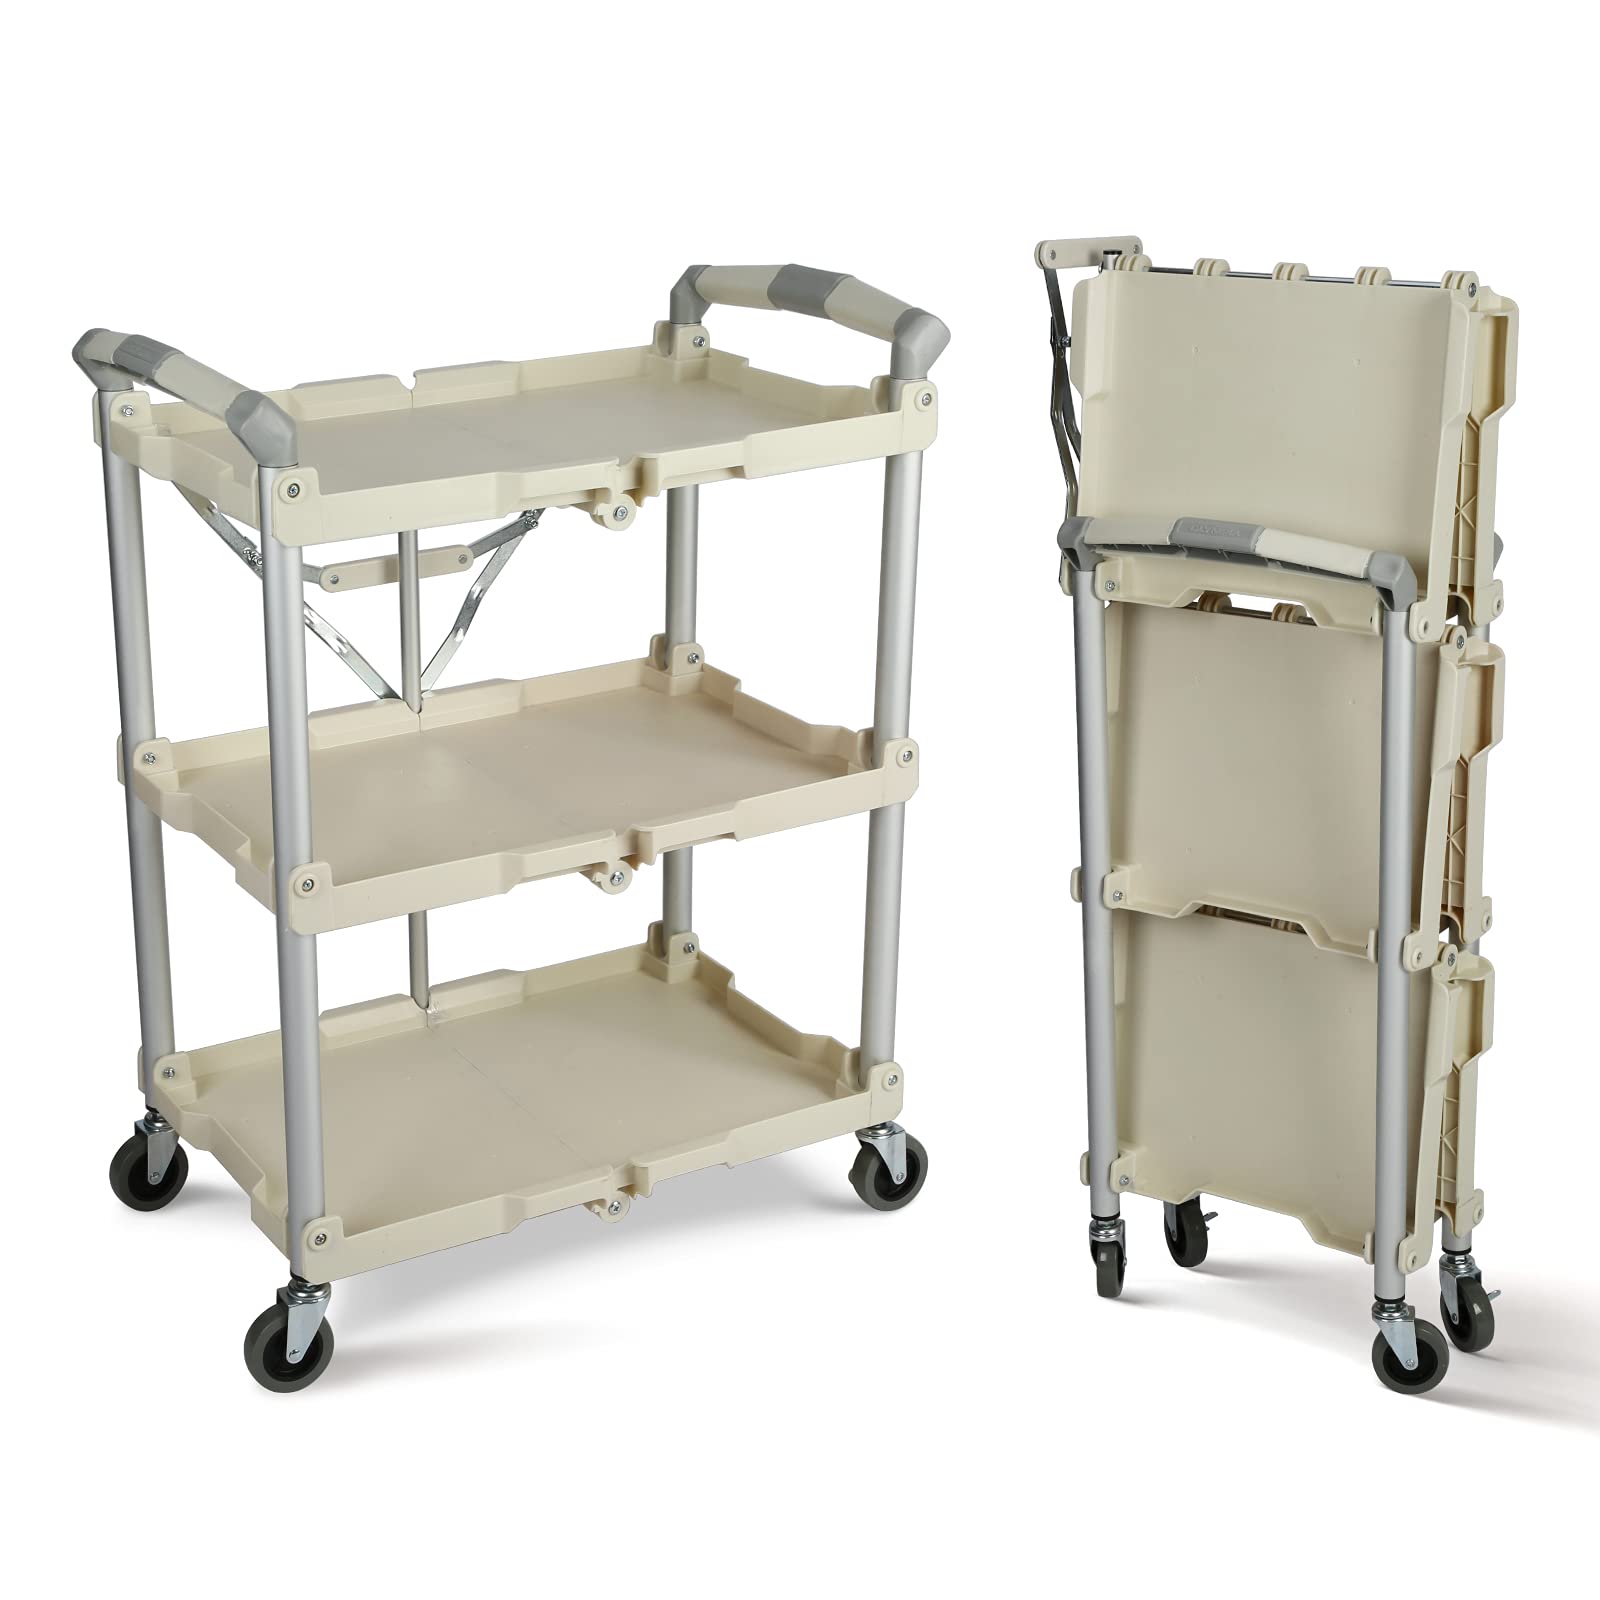 Olympia Tools Pack N Roll collapsible Service cart, 150LB capacity, 3-Tiered, gray,White,89-351